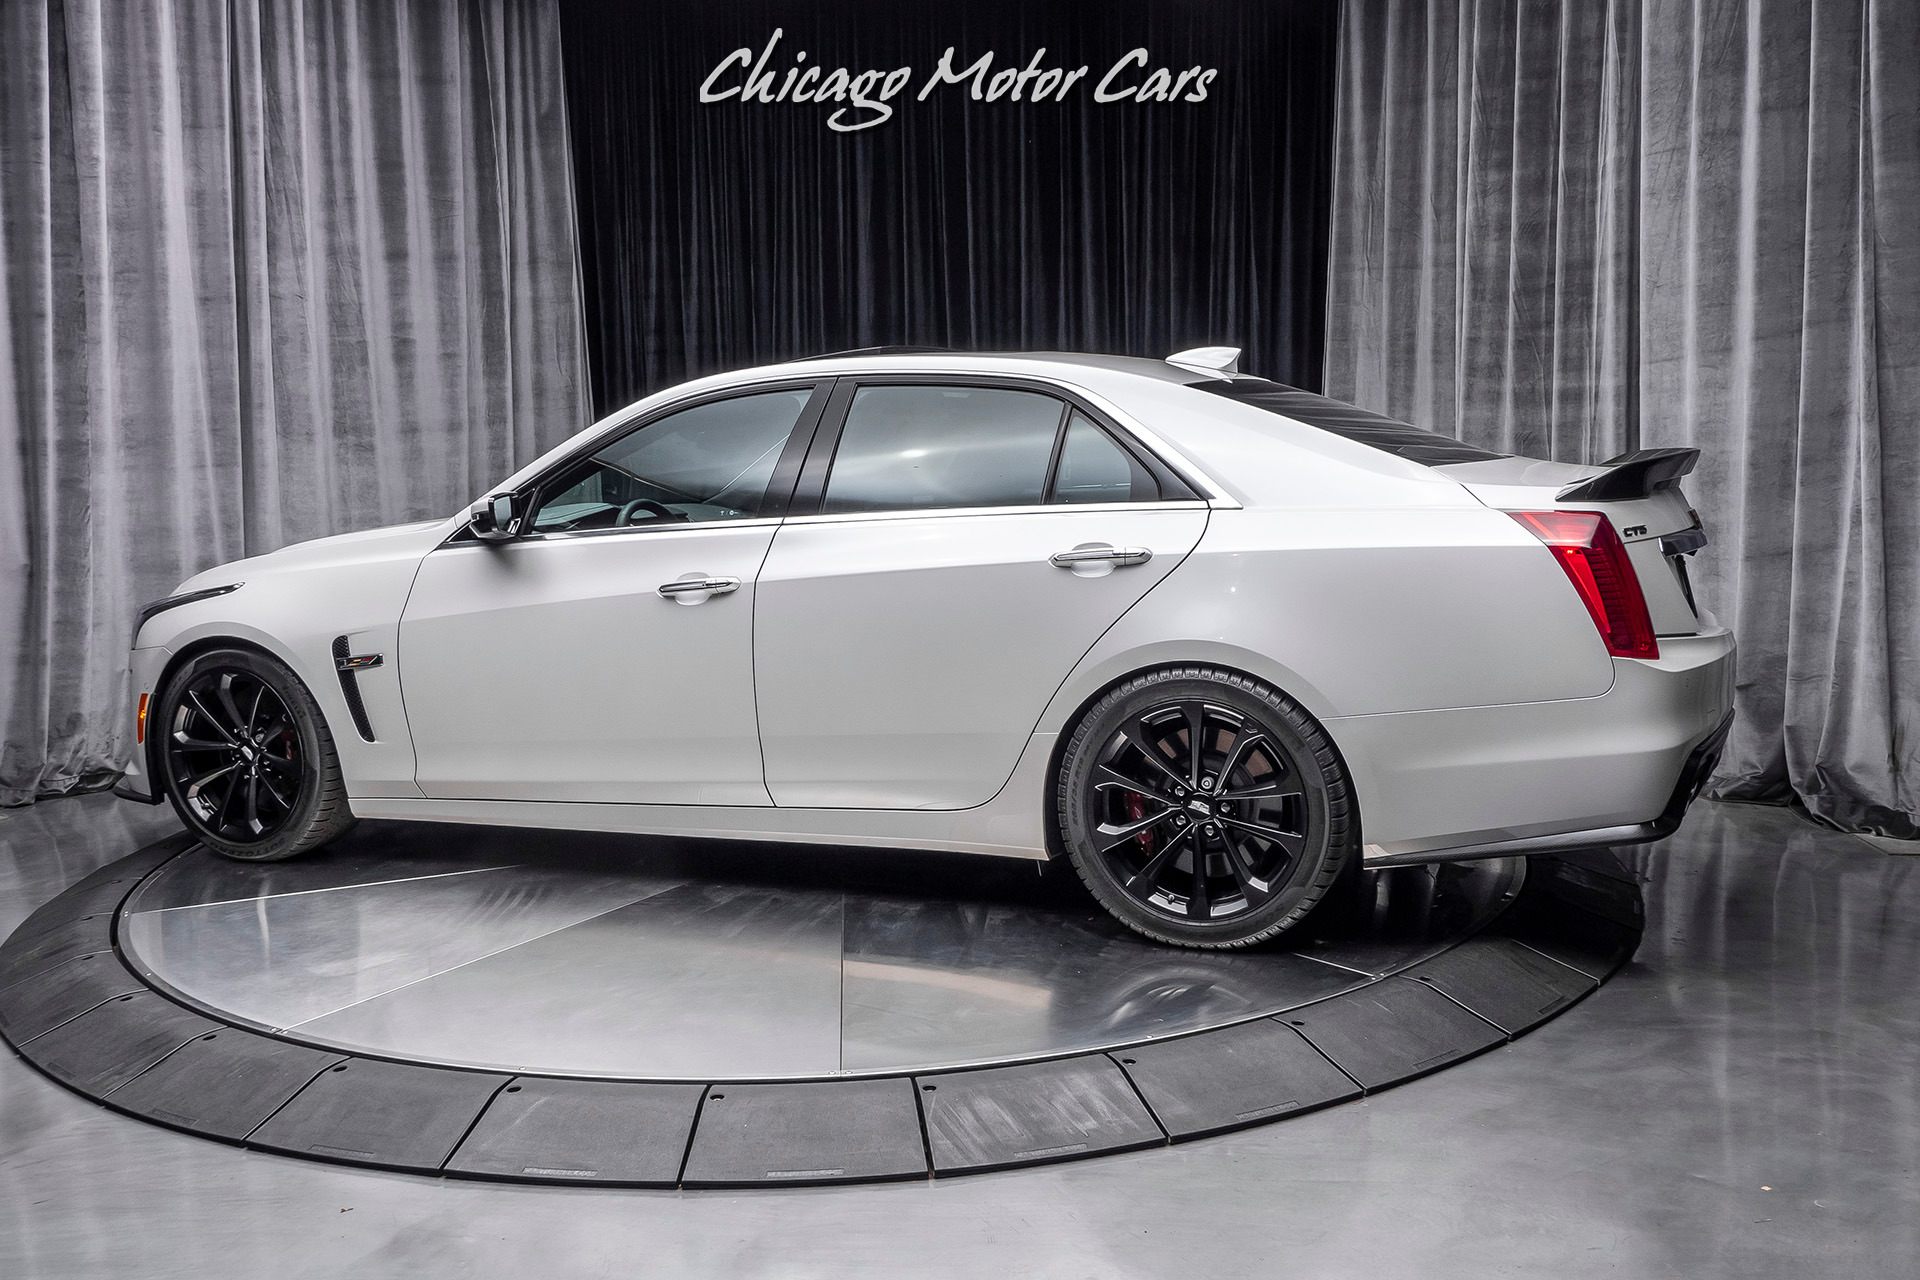 2018 Cadillac CTS-V in Crystal White Tri-Coat